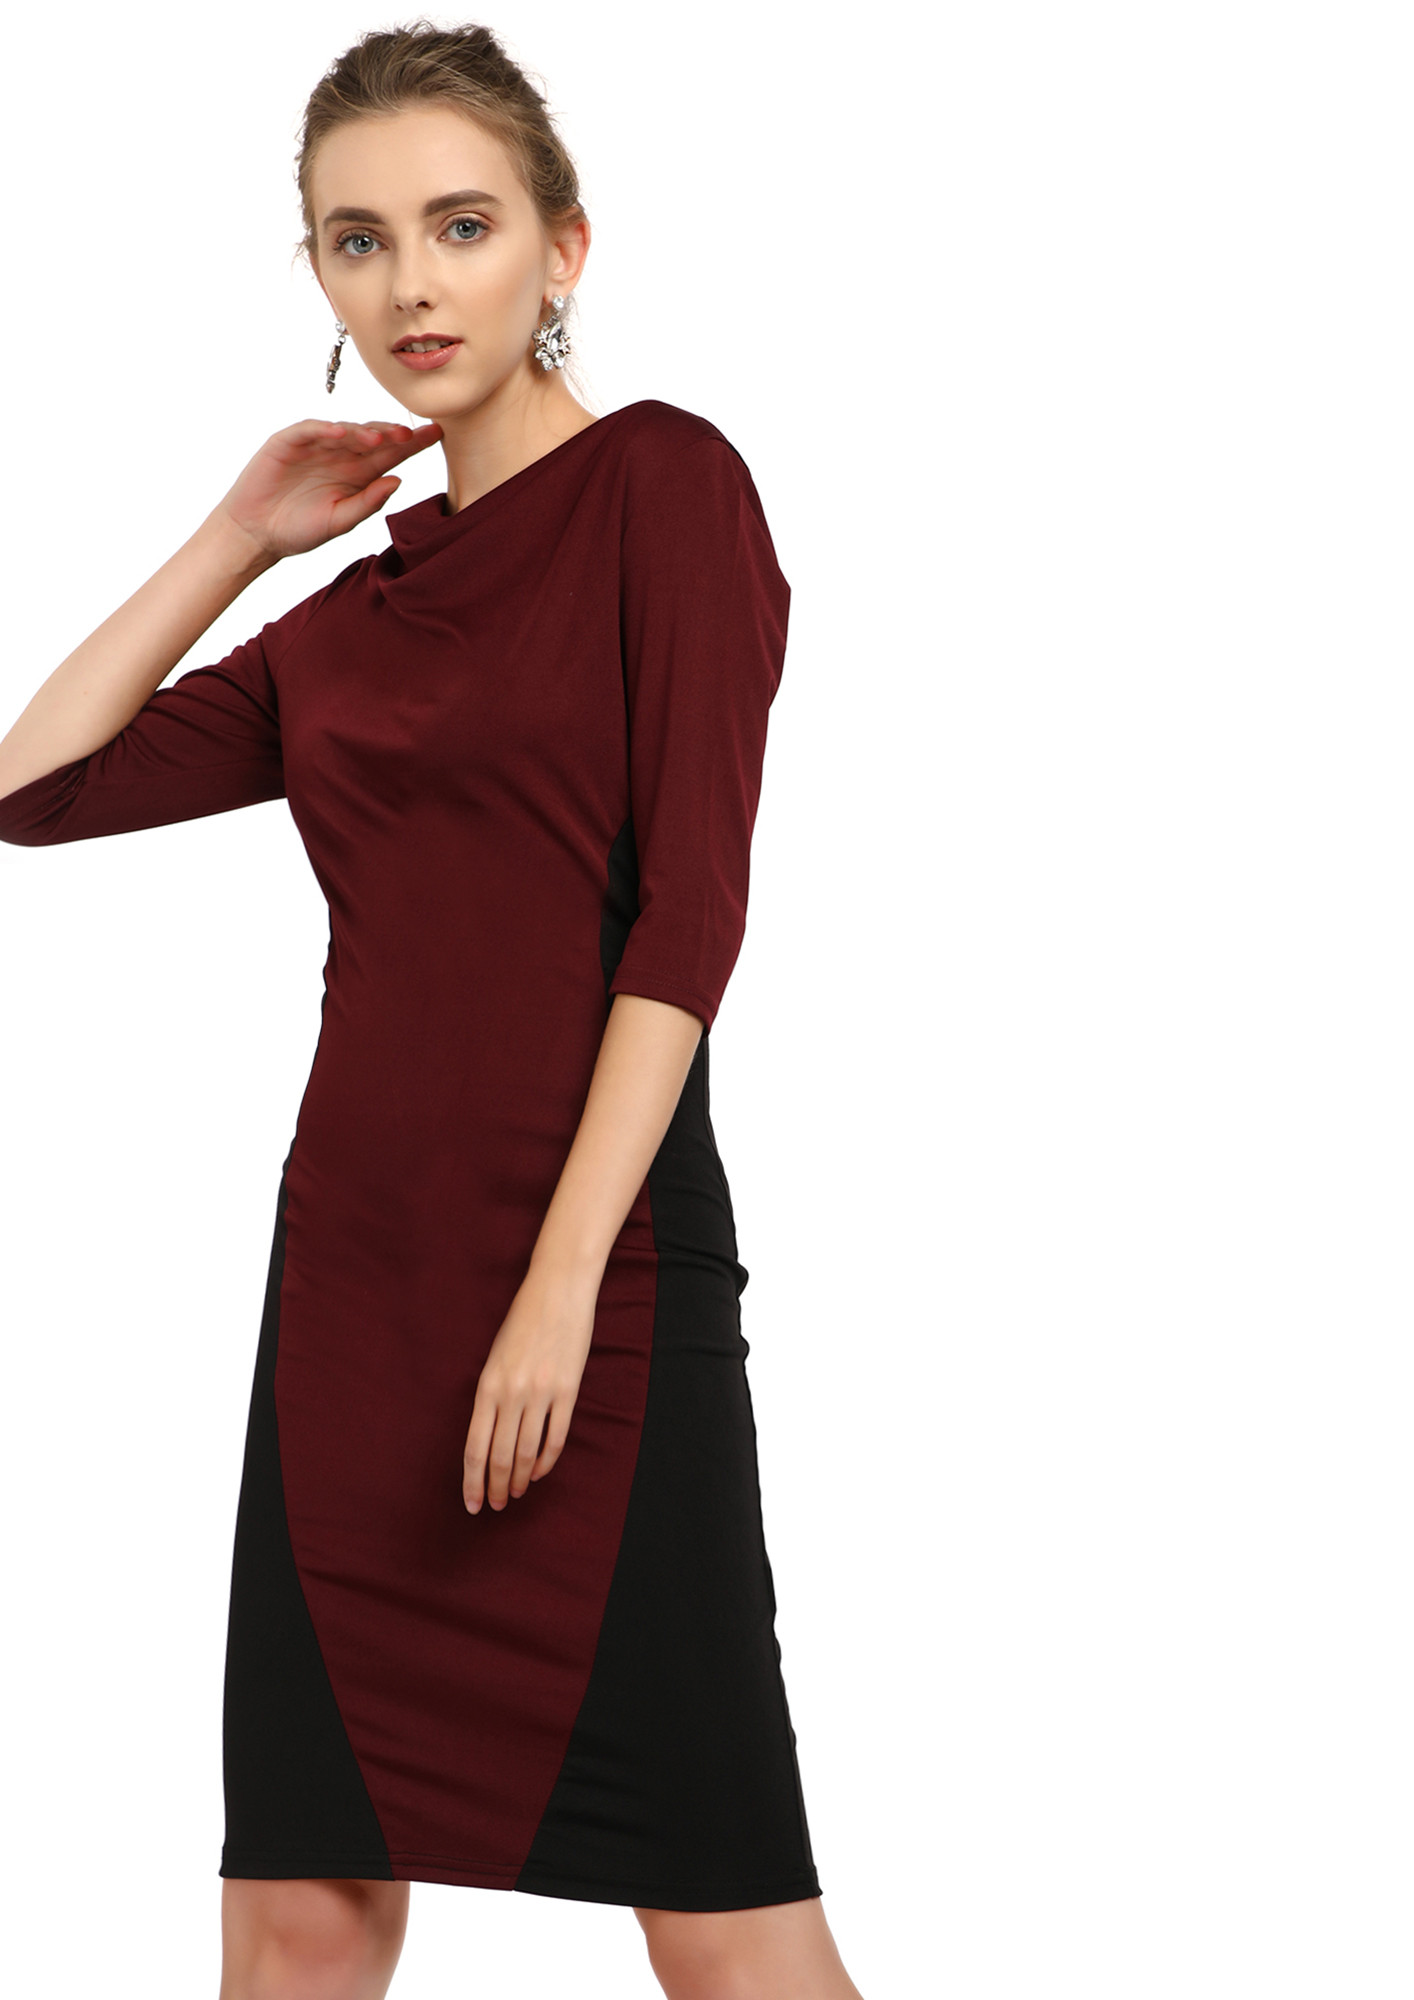 BLOCK ME BY STYLE MAROON BODYCON DRESS